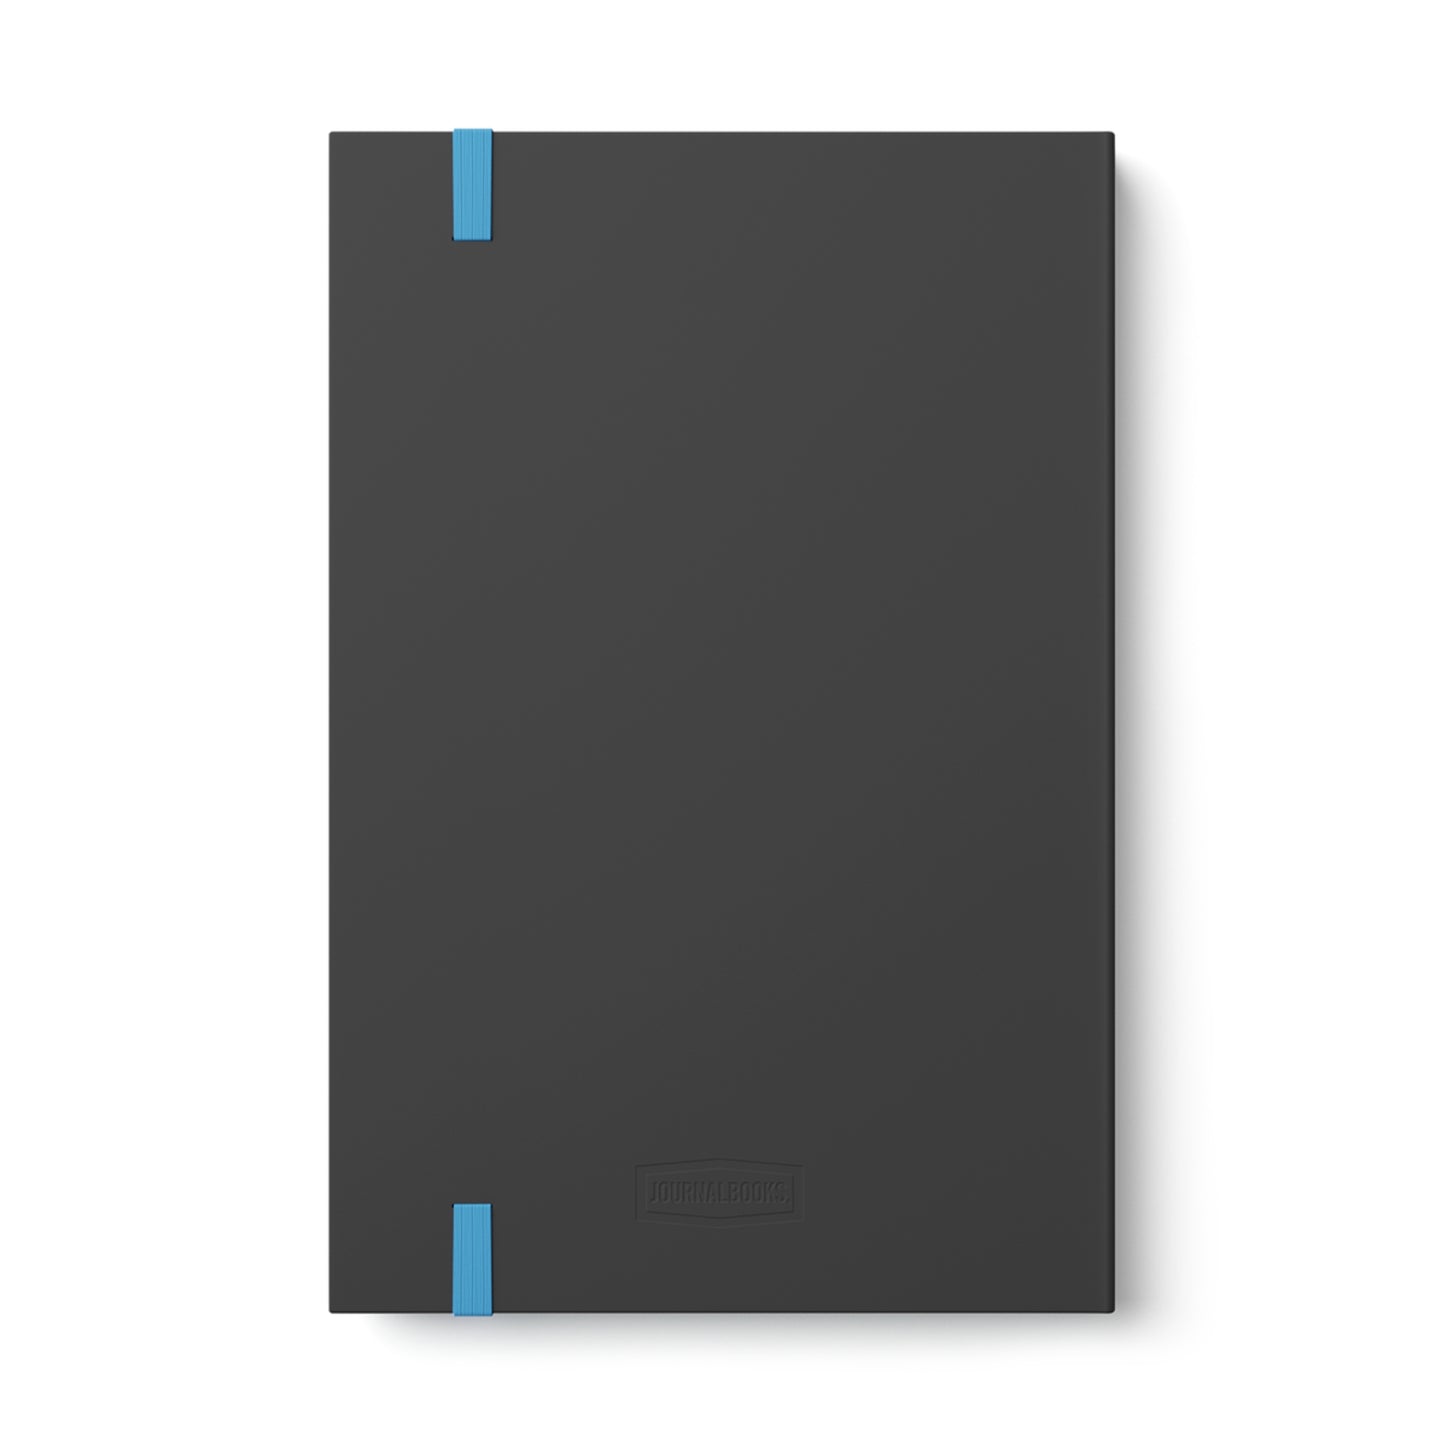 Kingdom Brother Lined Journal